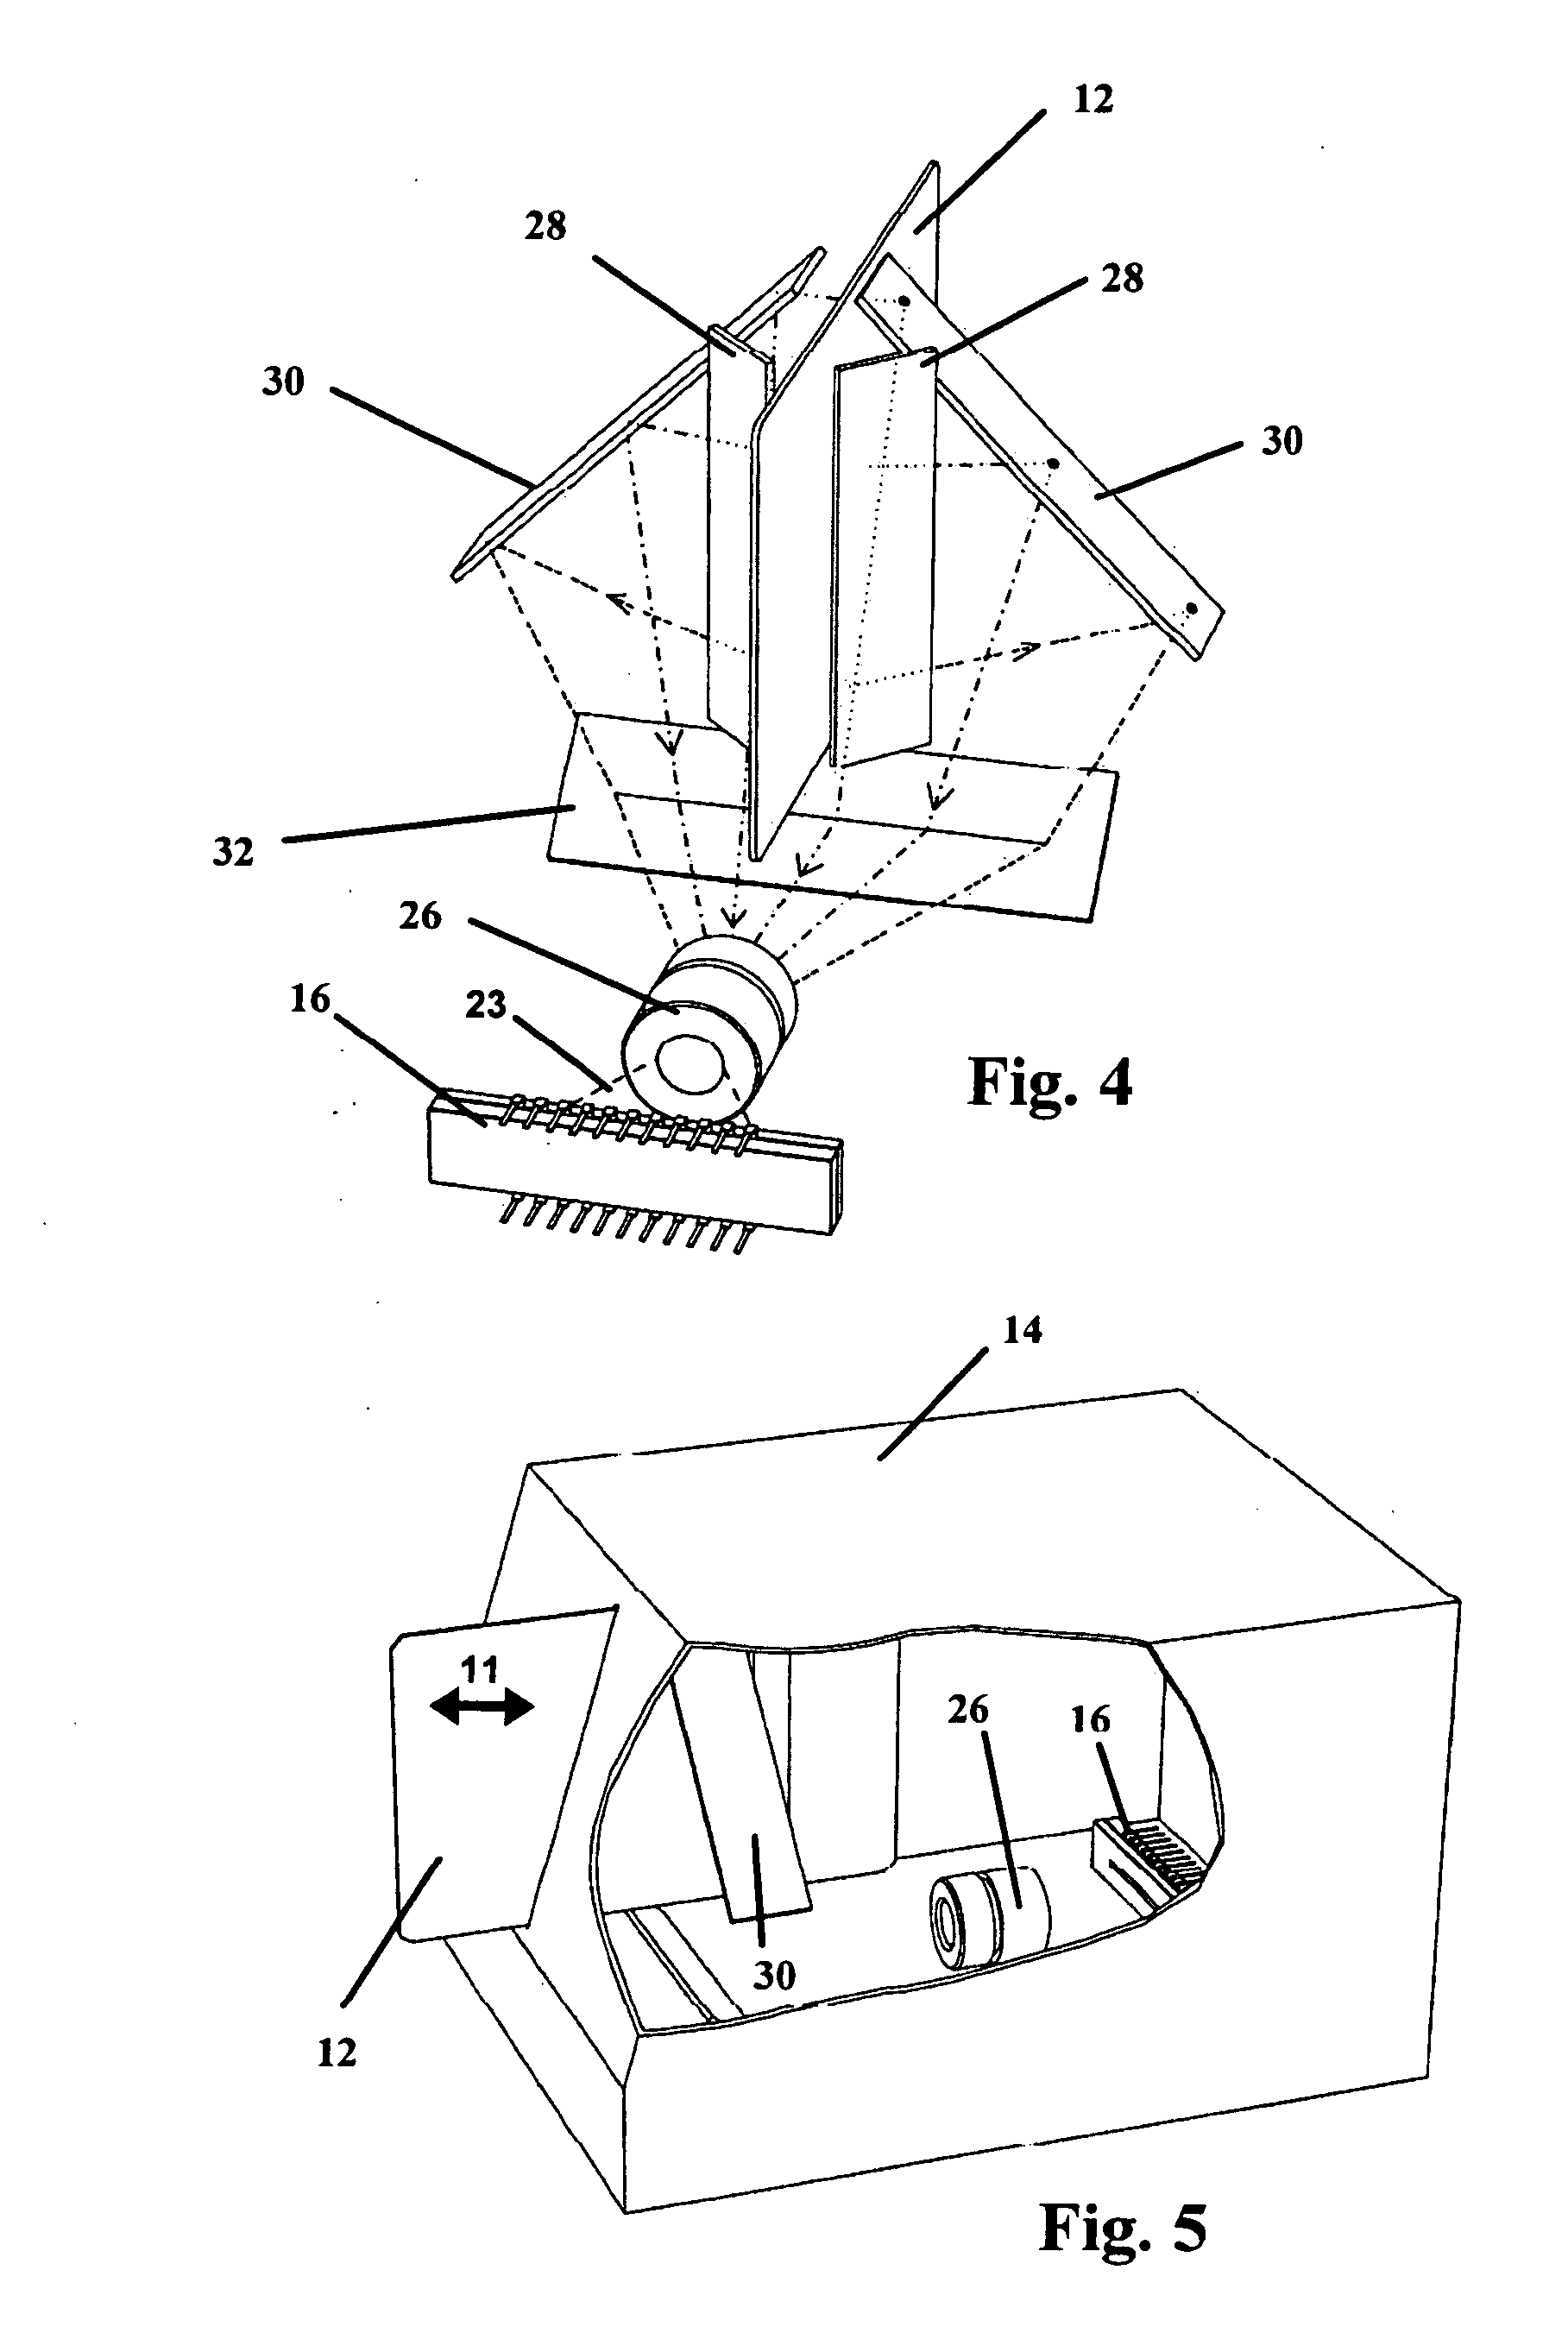 Imaging device and method for concurrent imaging of opposite sides of an identification card or document